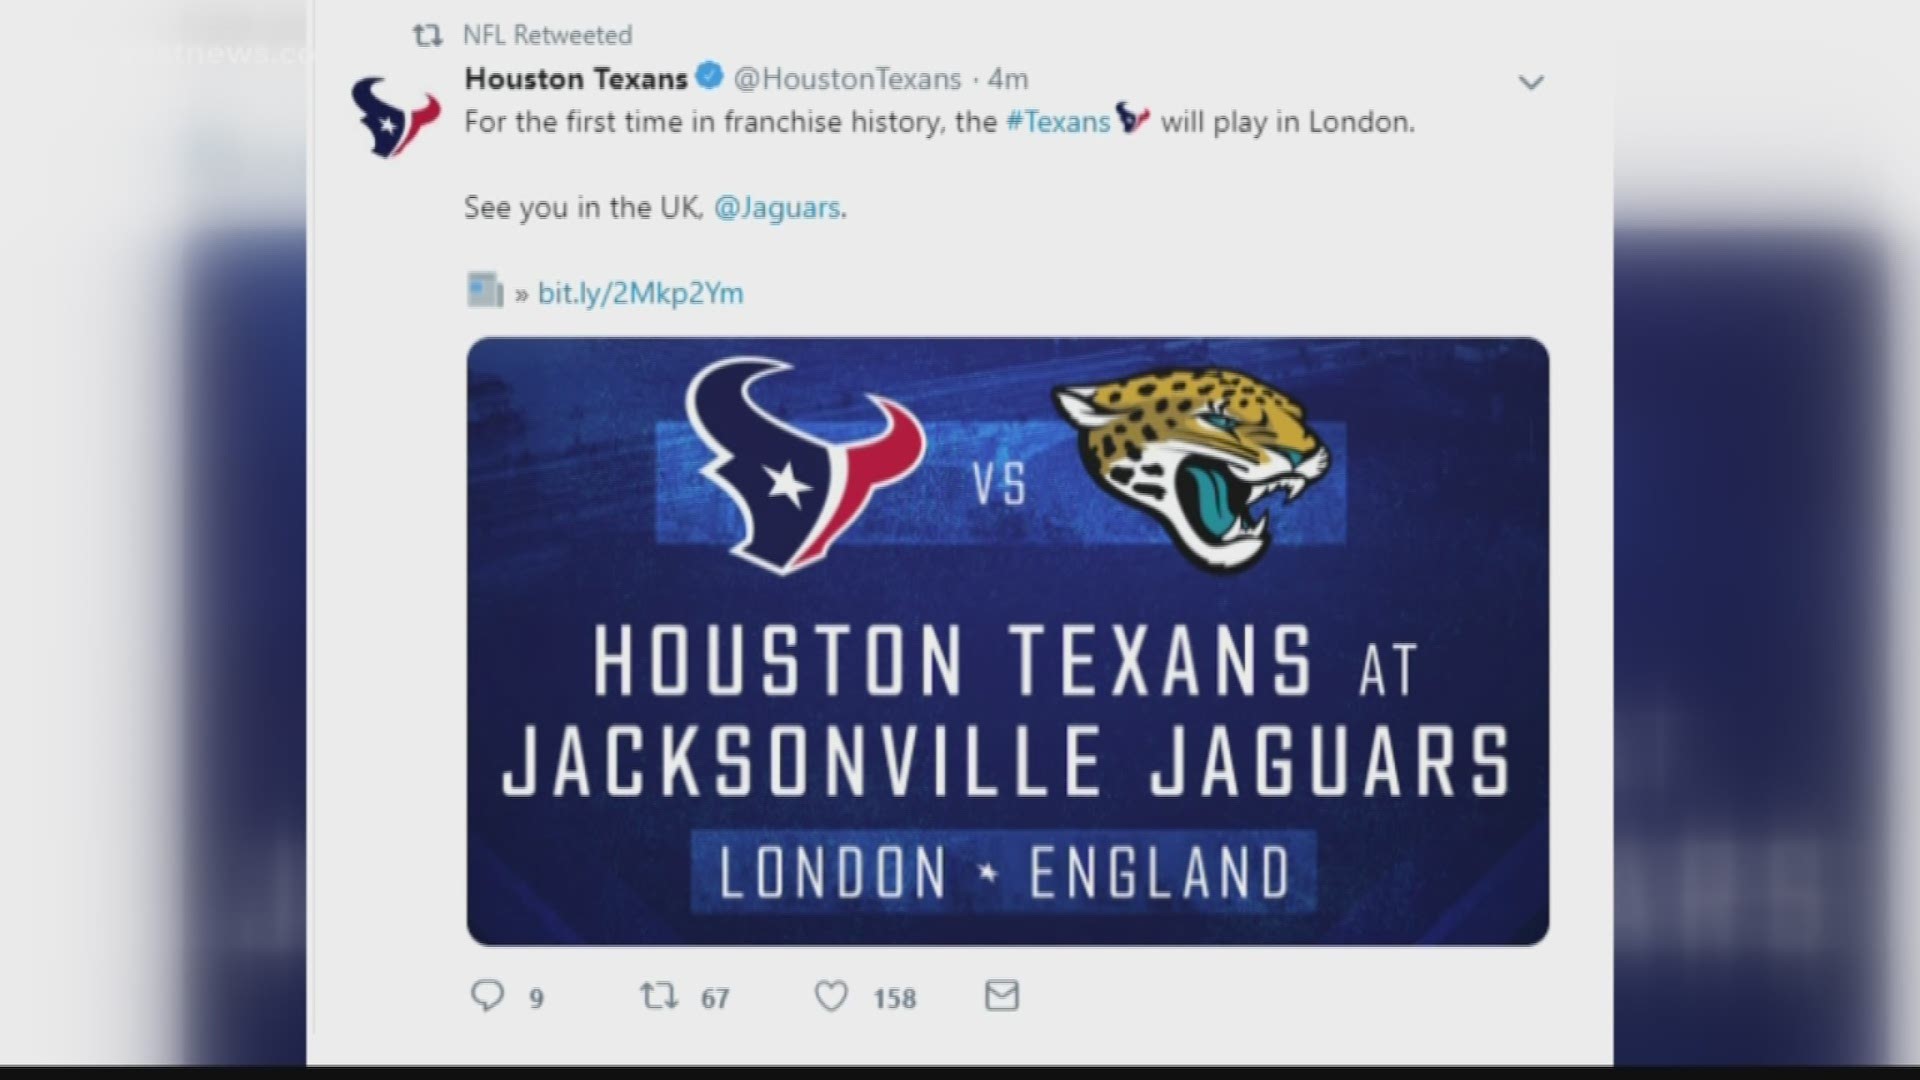 The Jacksonville Jaguars will play against the Houston Texans this year in London.